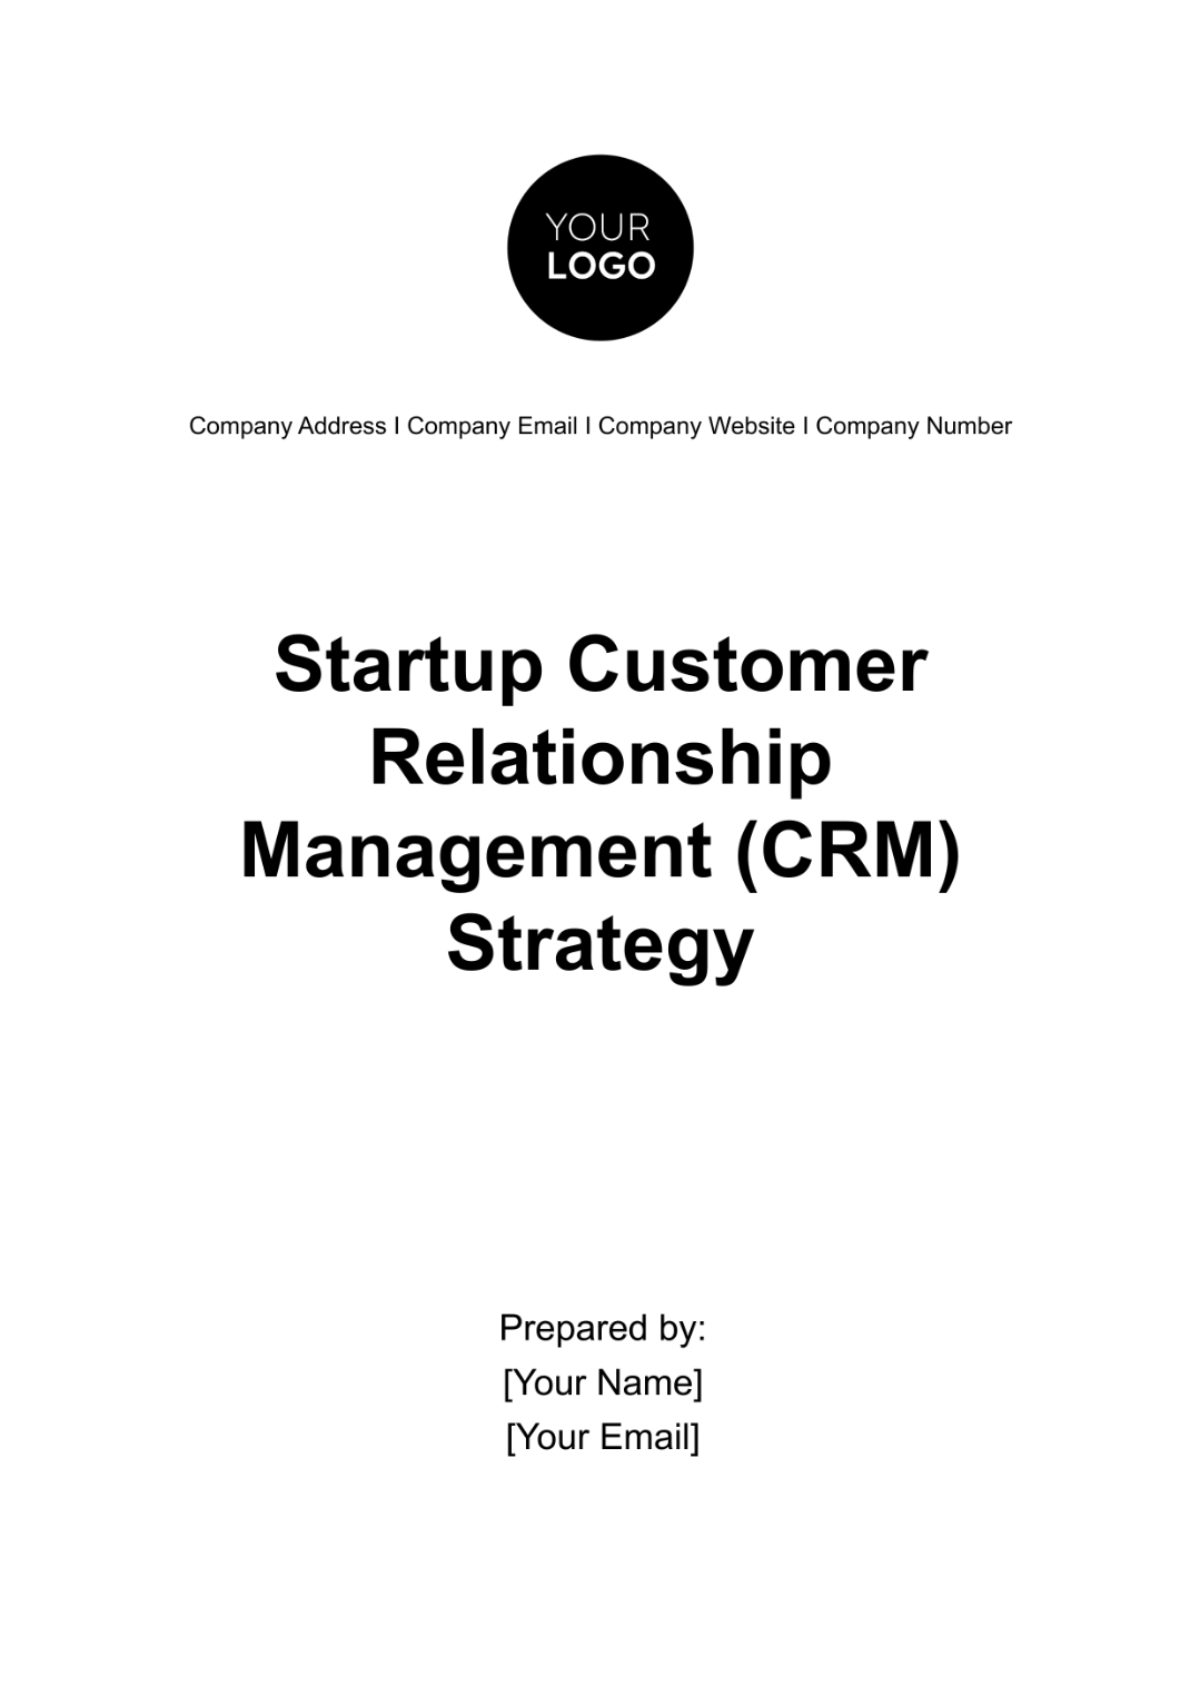 Free Startup Customer Relationship Management (CRM) Strategy Template